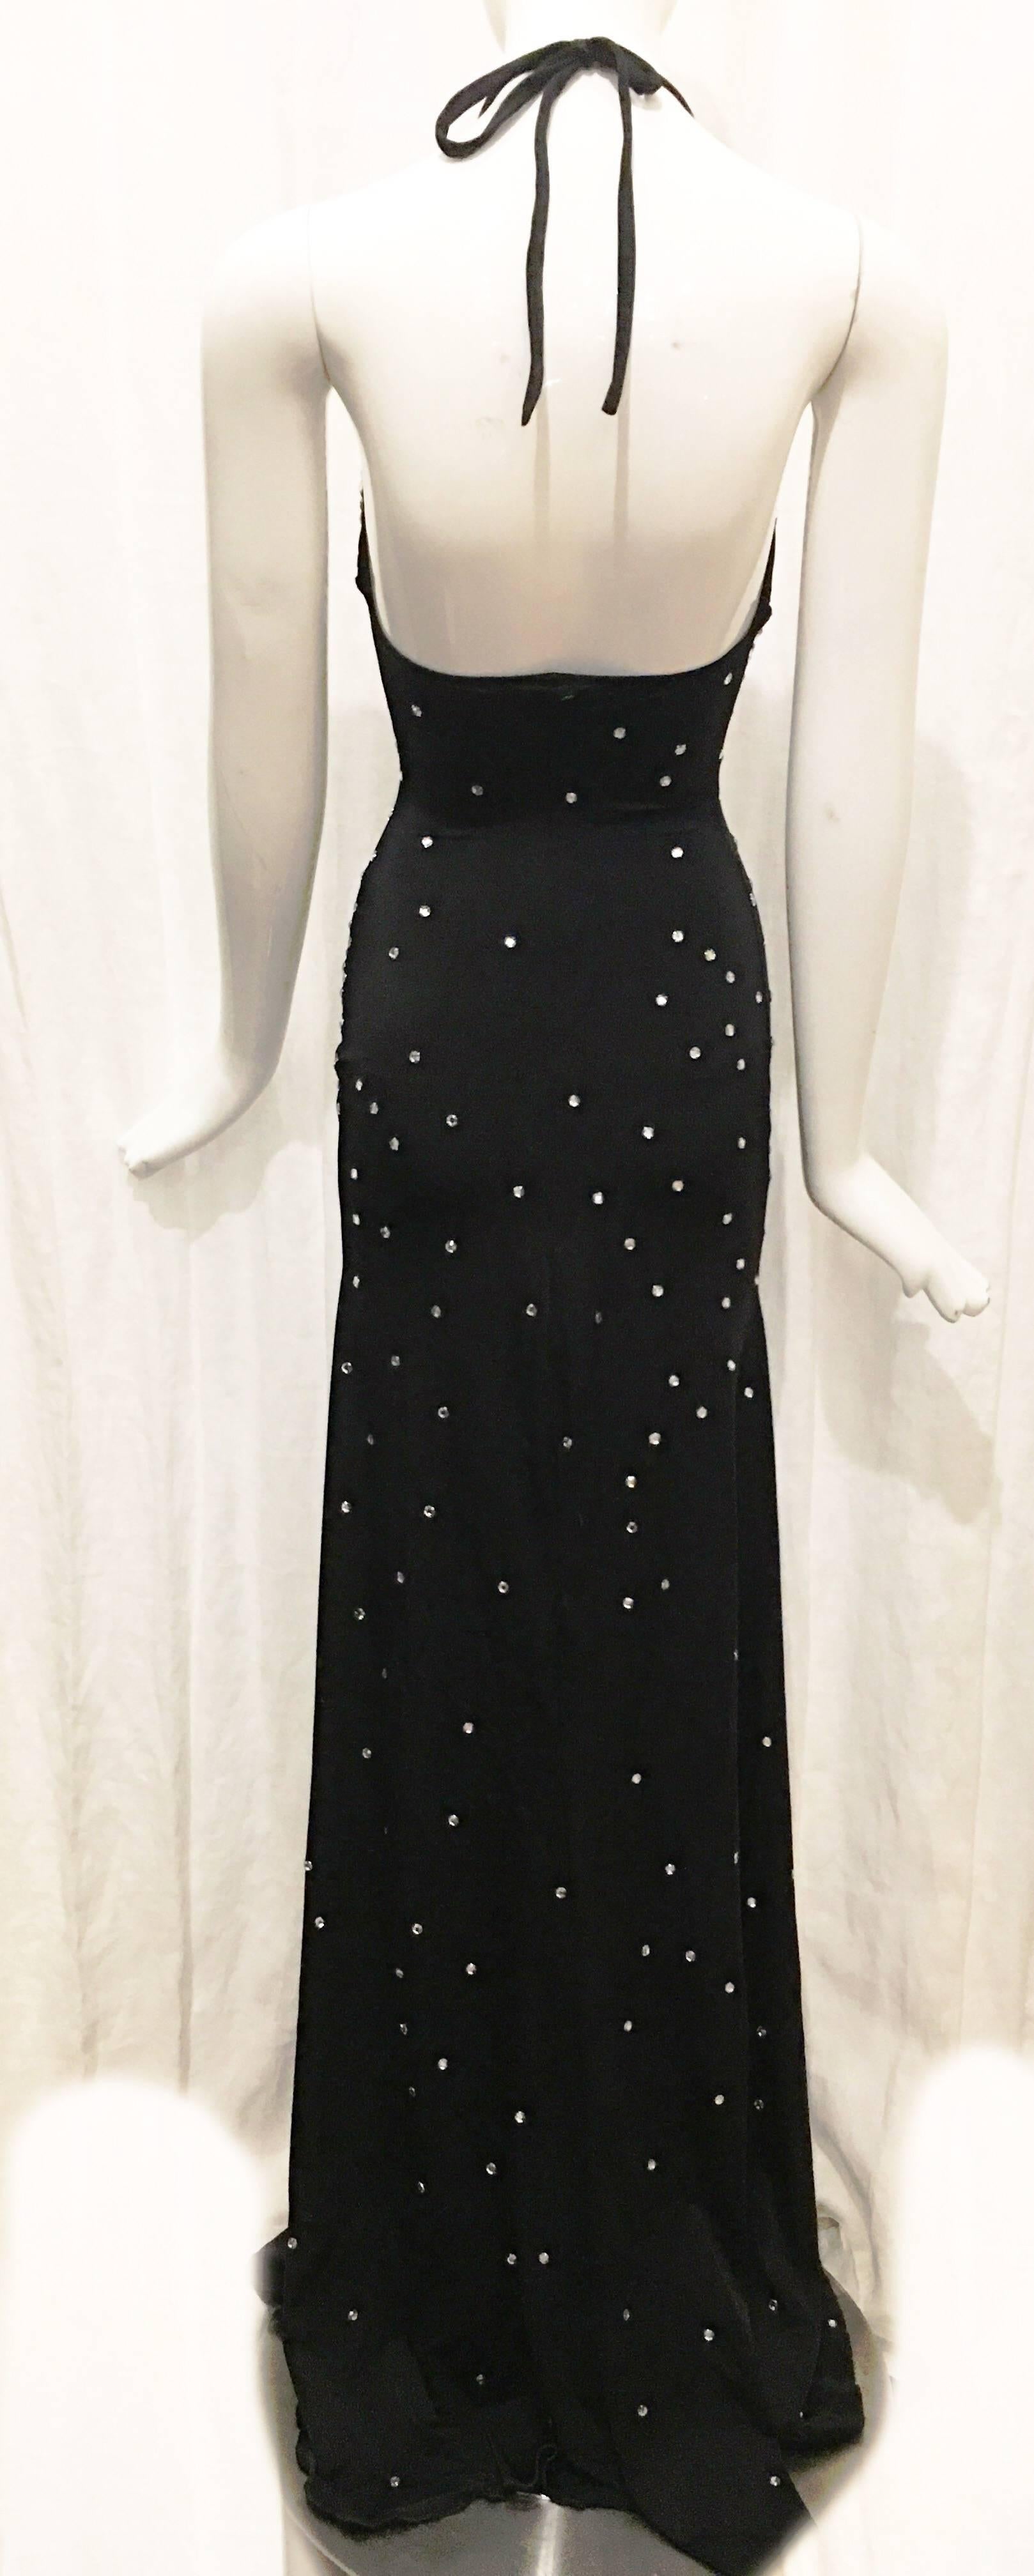 Black Full Length Rhinestone Embellished Halter Dress, 1990s  In Excellent Condition For Sale In Brooklyn, NY